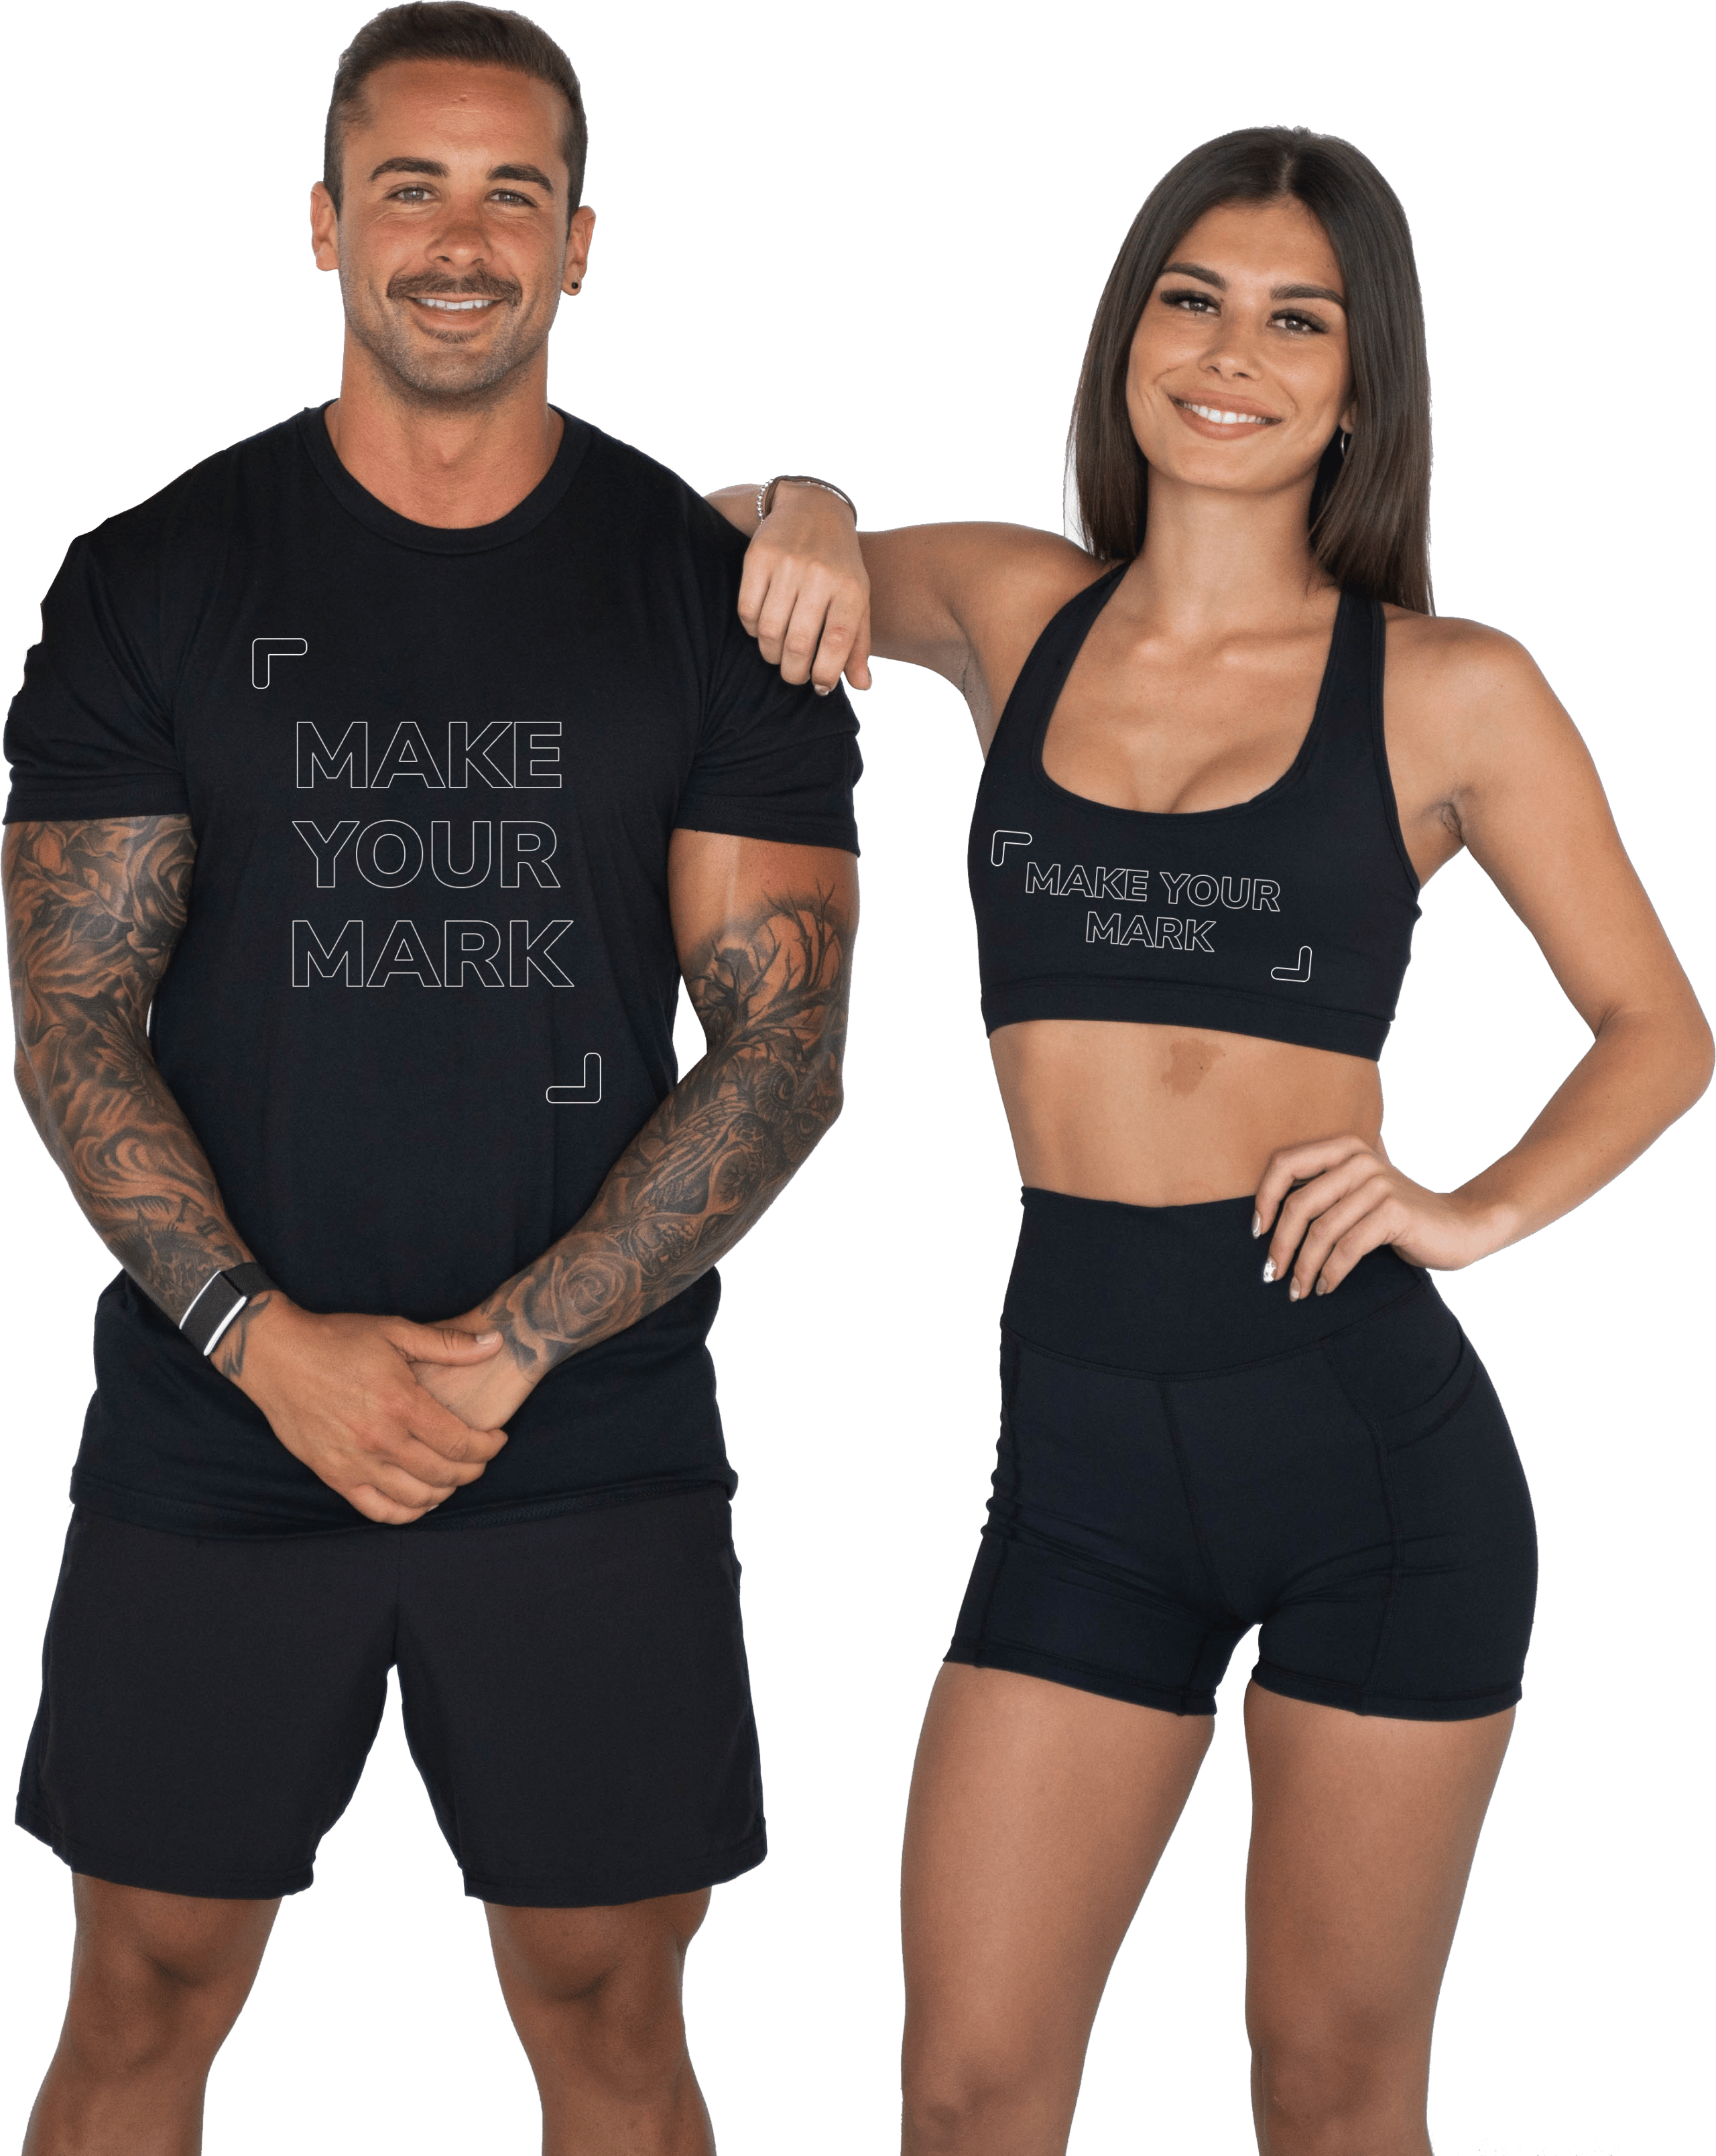 Sample fitness clothing